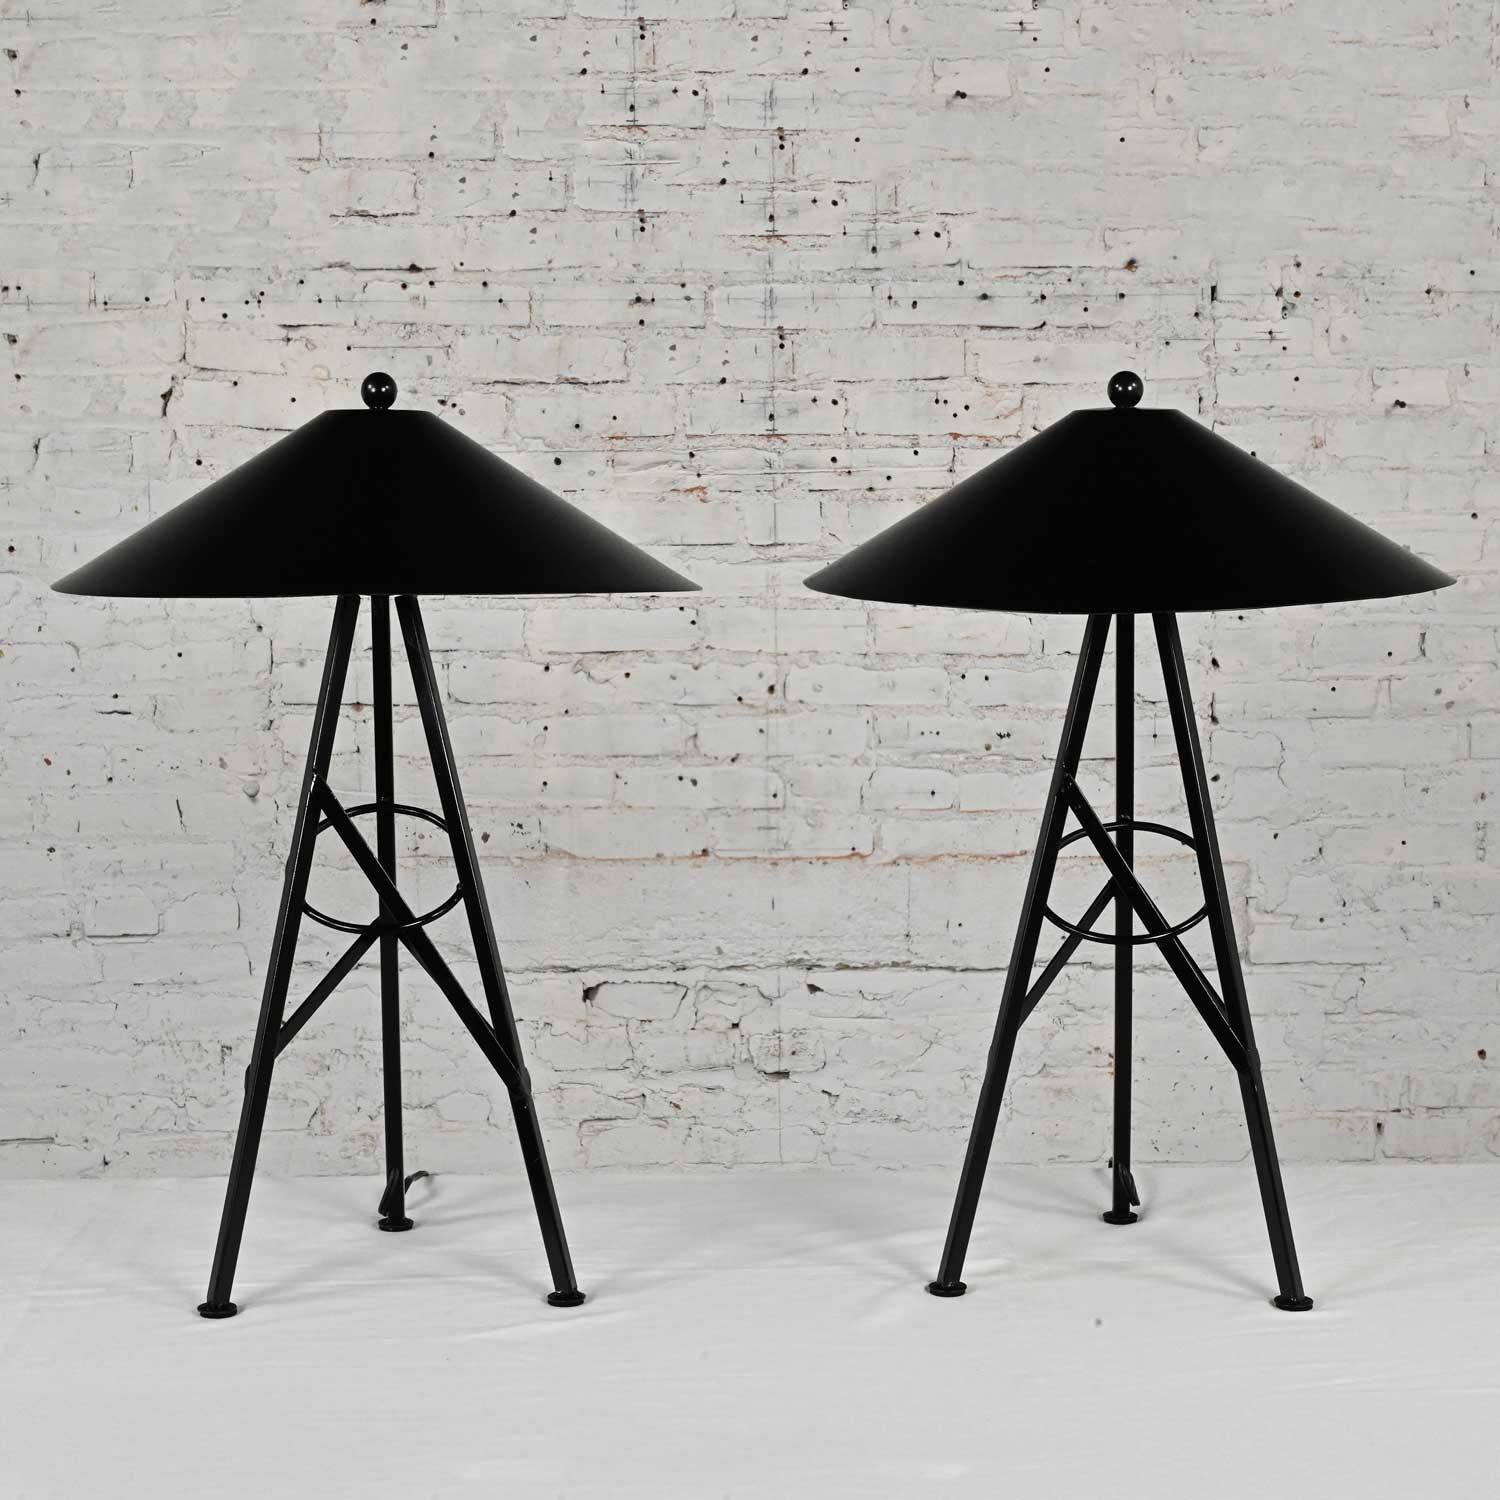 Post-Modern Late 20th Modern to Postmodern Metal Tri Leg Table Lamps Aluminum Coolie Shades For Sale